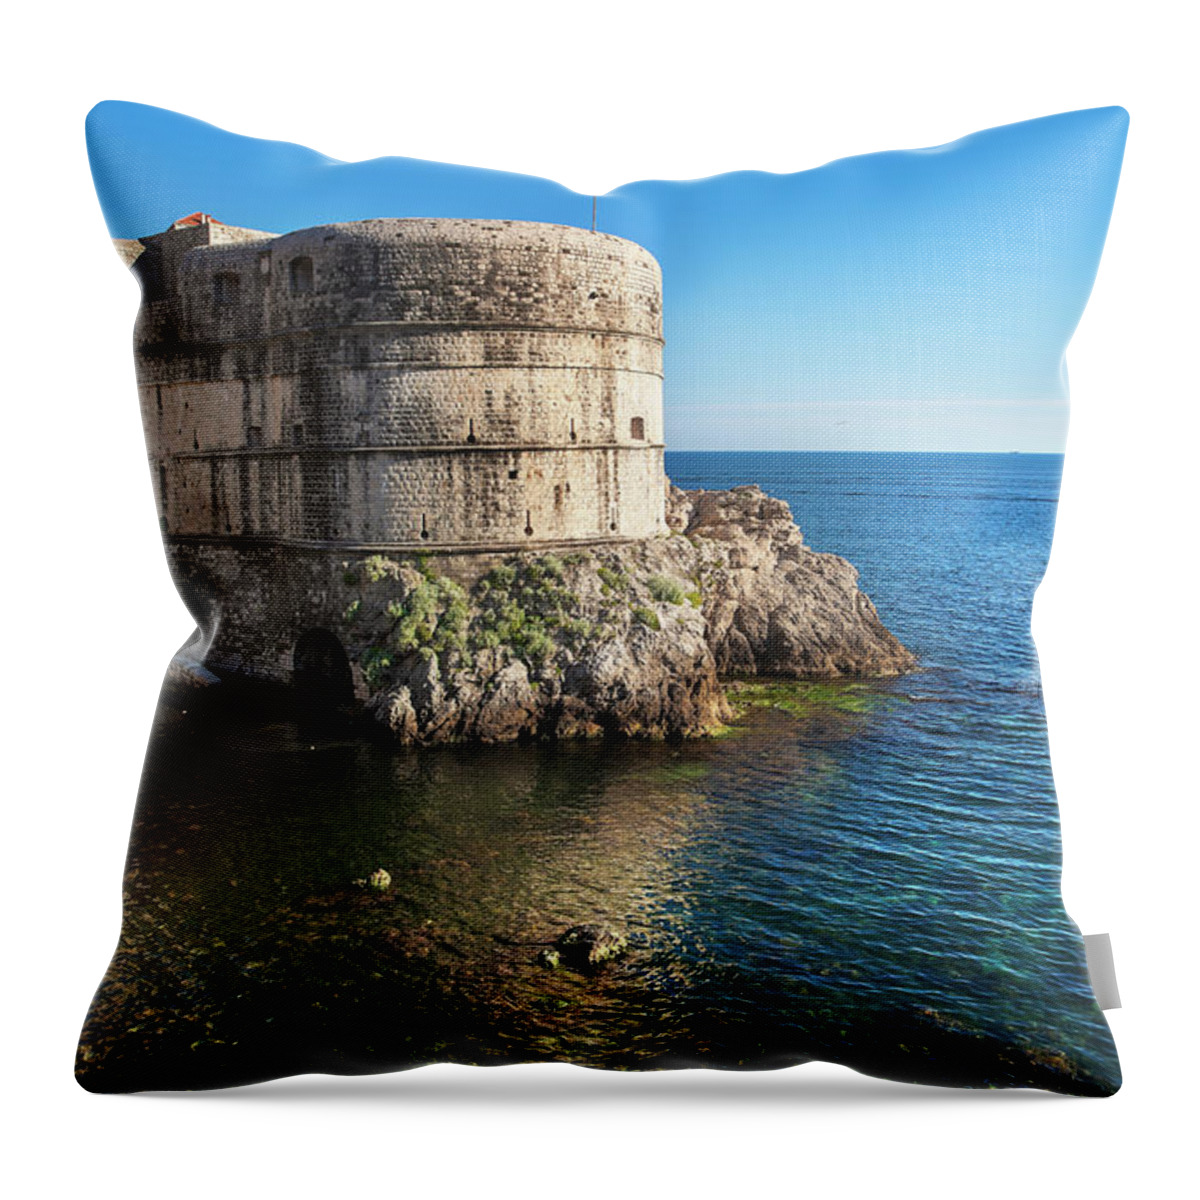 Tranquility Throw Pillow featuring the photograph Dubvrovnik Adriatic Old Town #10 by Gonzalo Azumendi